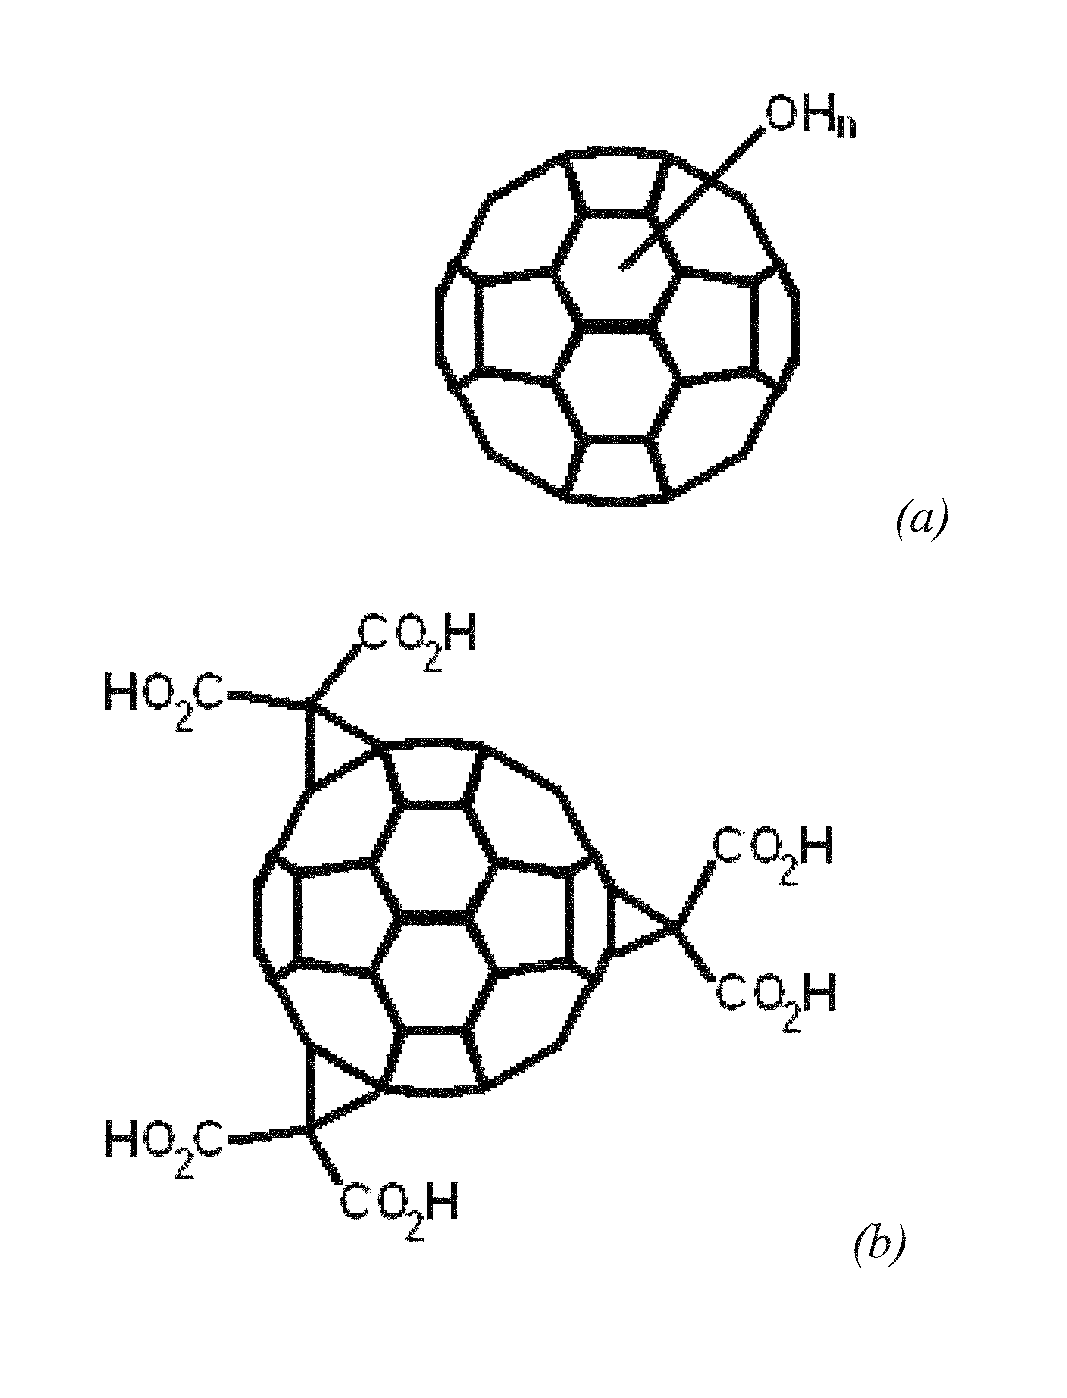 Systems and methods based on radiation induced heating or ignition of functionalized fullerenes